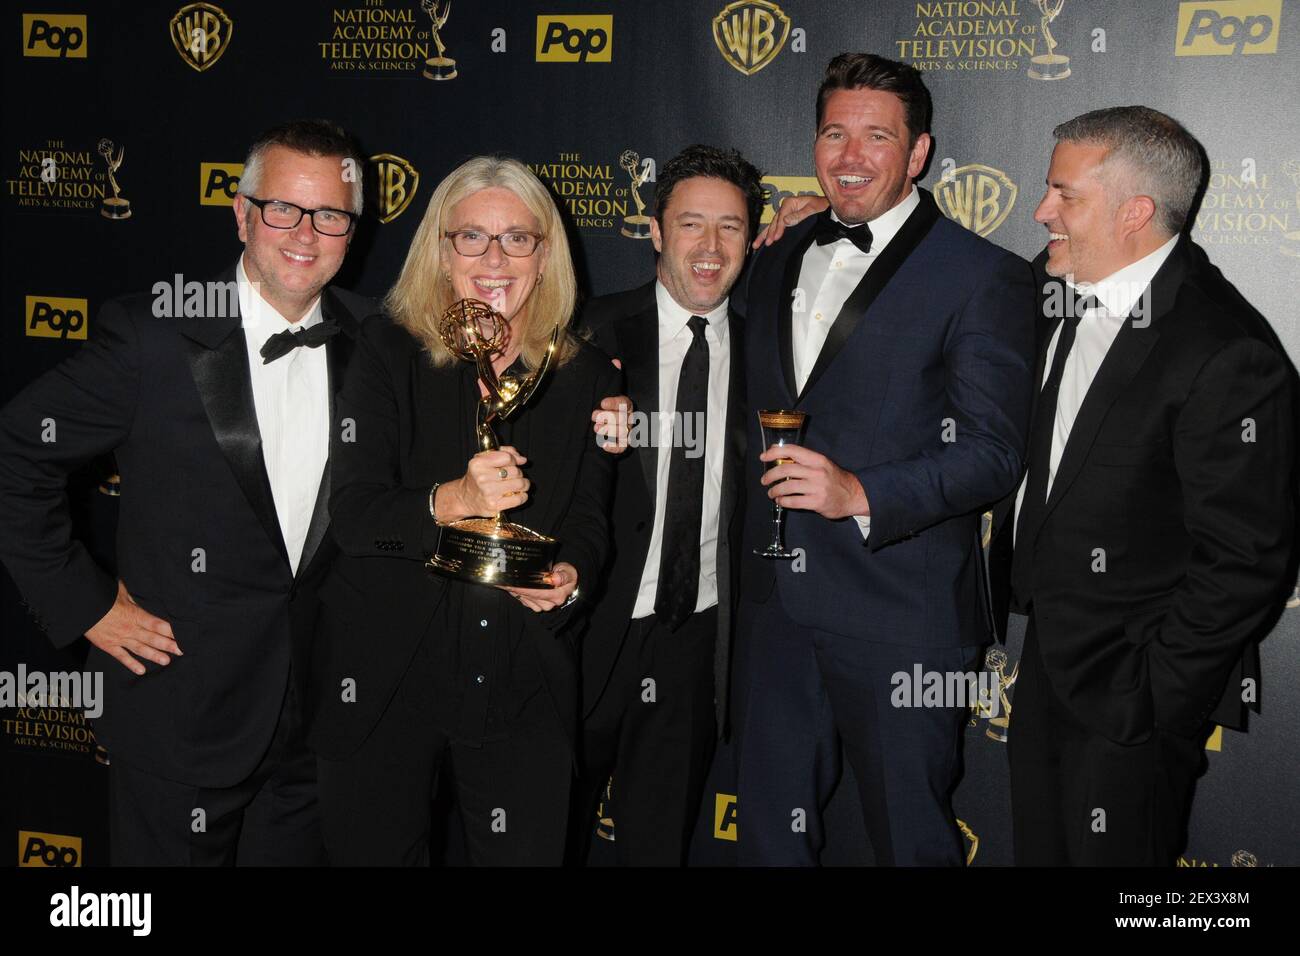 26 April 2015 - Burbank, California - Jonathan Norman, Mary Connelly, Andy  Lassner, Kevin Leman, Ed Glavin. The 42nd Annual Daytime Emmy Awards -  Press Room held at Warner Bros. Studios. Photo